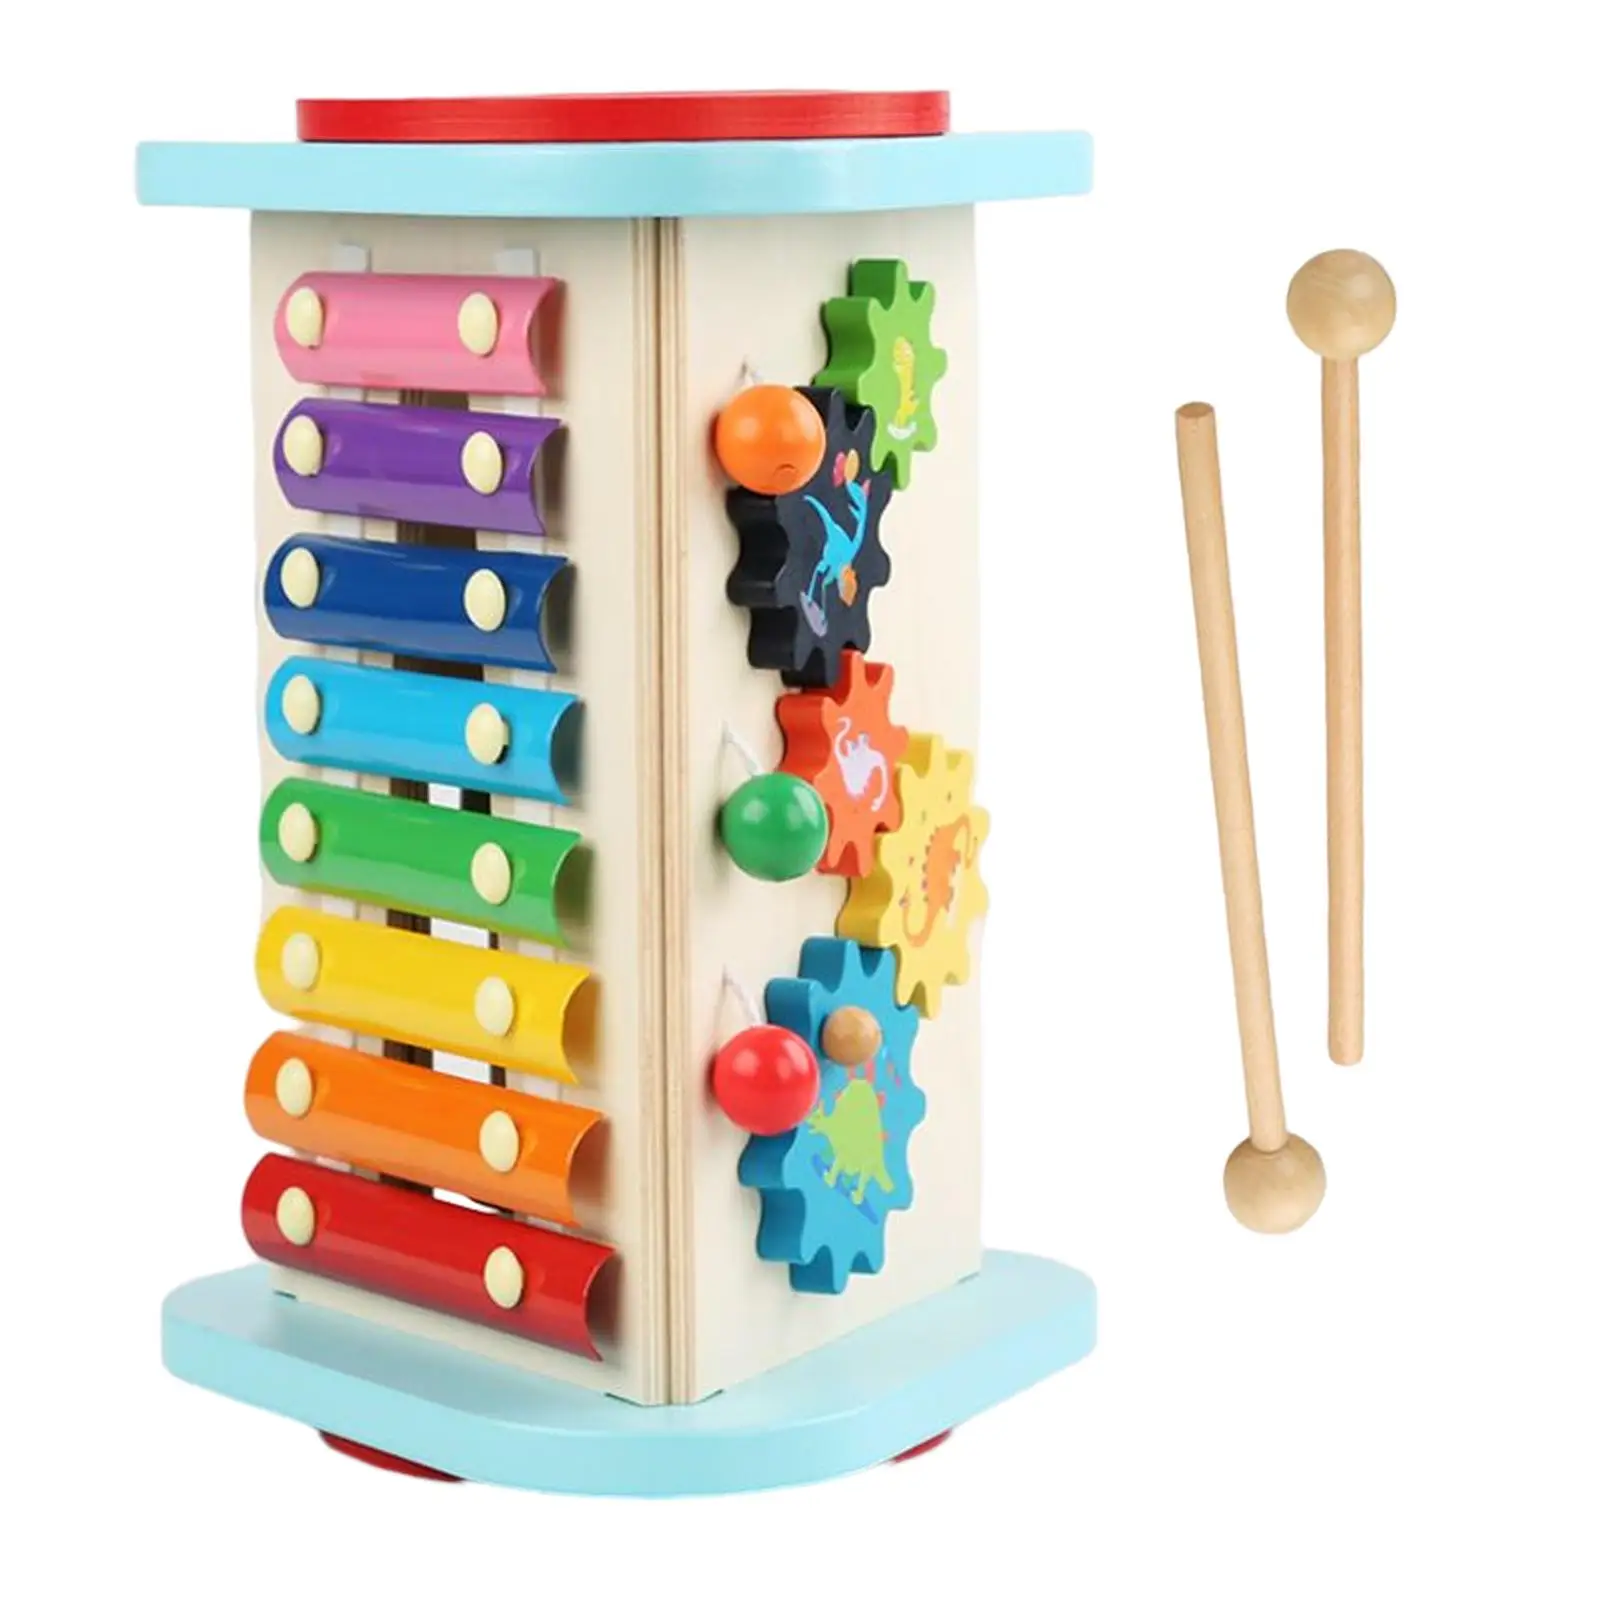 Percussion Instruments Toy with 2 Mallets Fine Motor Skill Wooden for Gifts